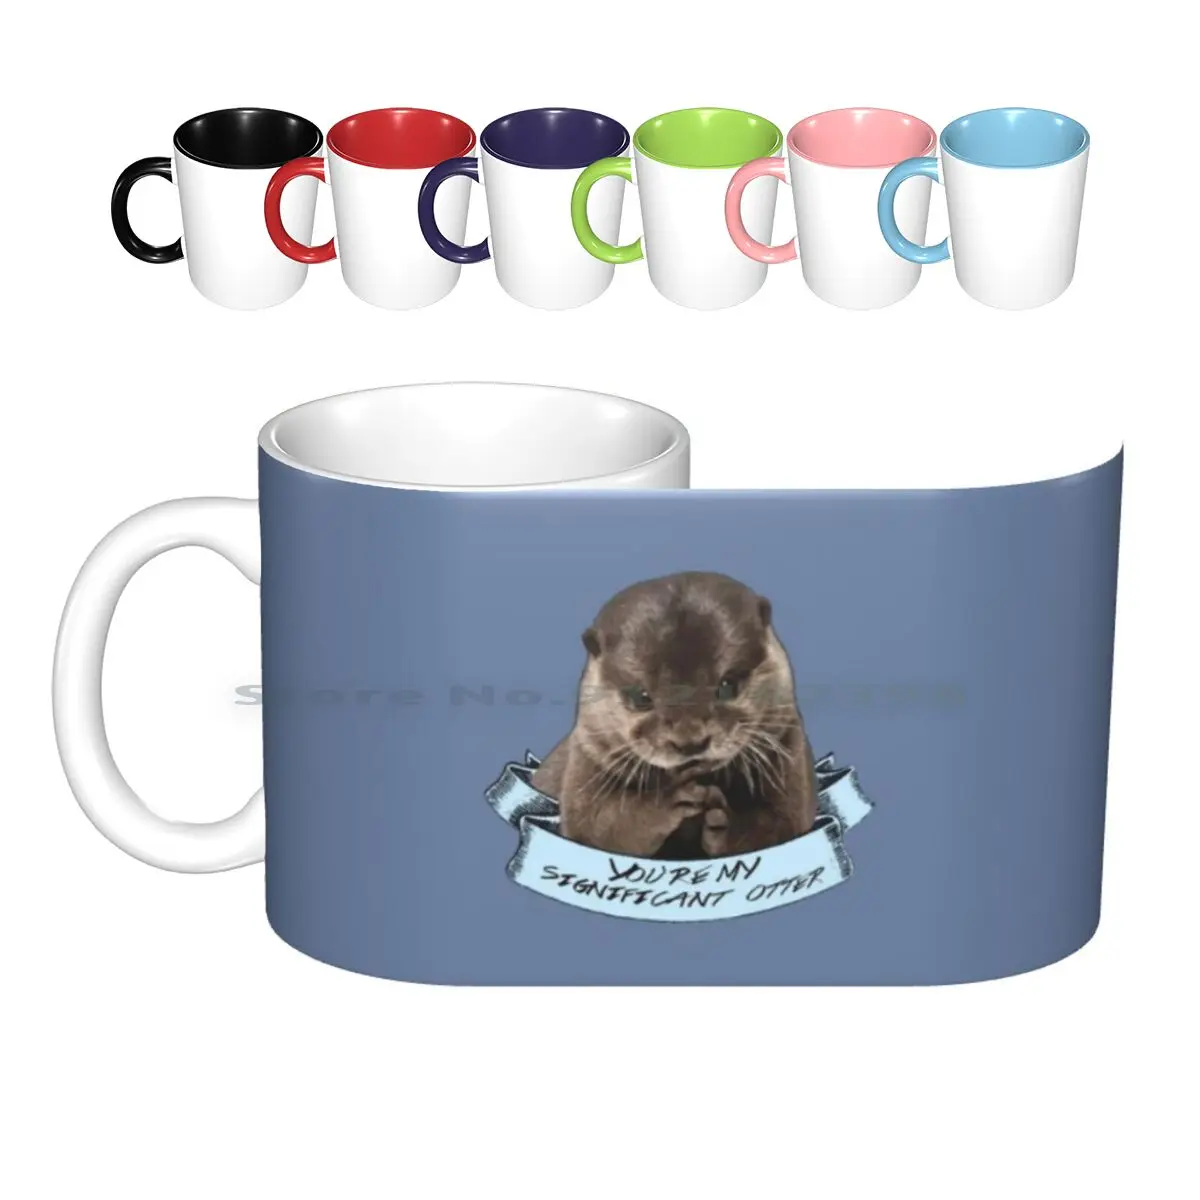 

You're My Significant Otter Ceramic Mugs Coffee Cups Milk Tea Mug Otter Otter Otterly Awesome Cheesy Love Romantic Creative